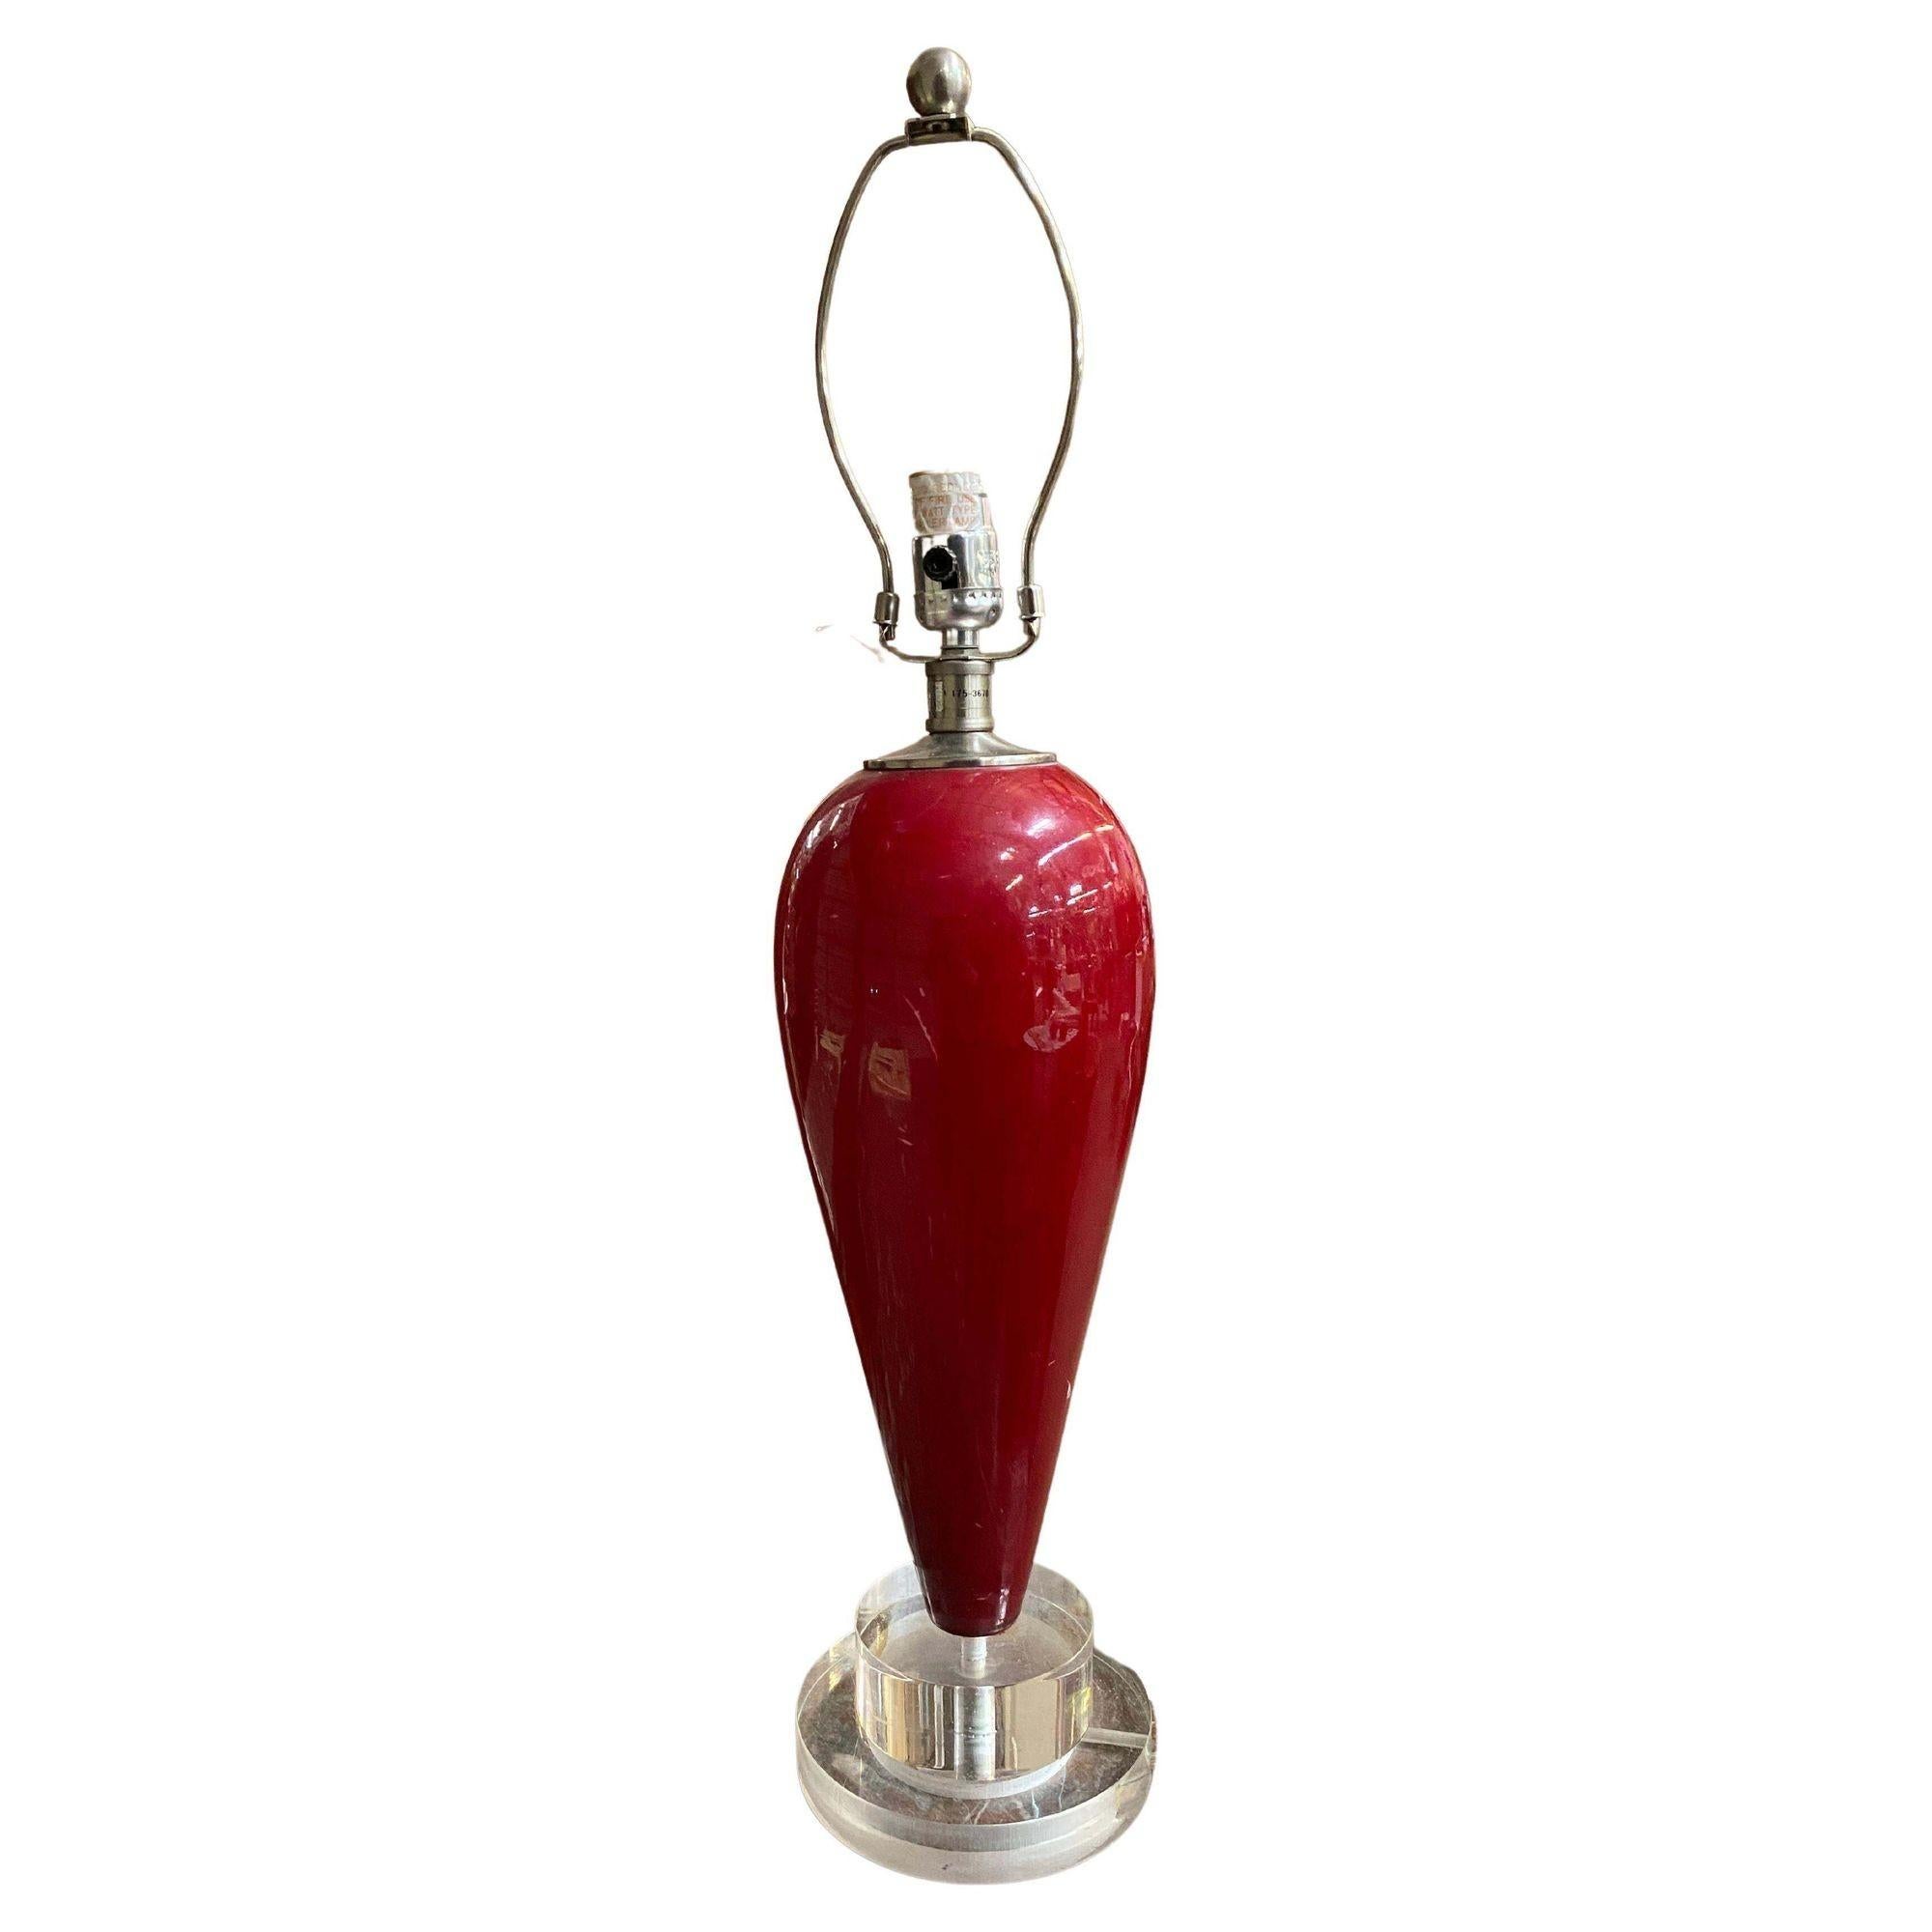 These 90s-style table lamps come in a bright red tear-drop shape made of ceramic. They sit on clear acrylic bases, giving them a modern look. These lamps add a pop of color and style to any room.